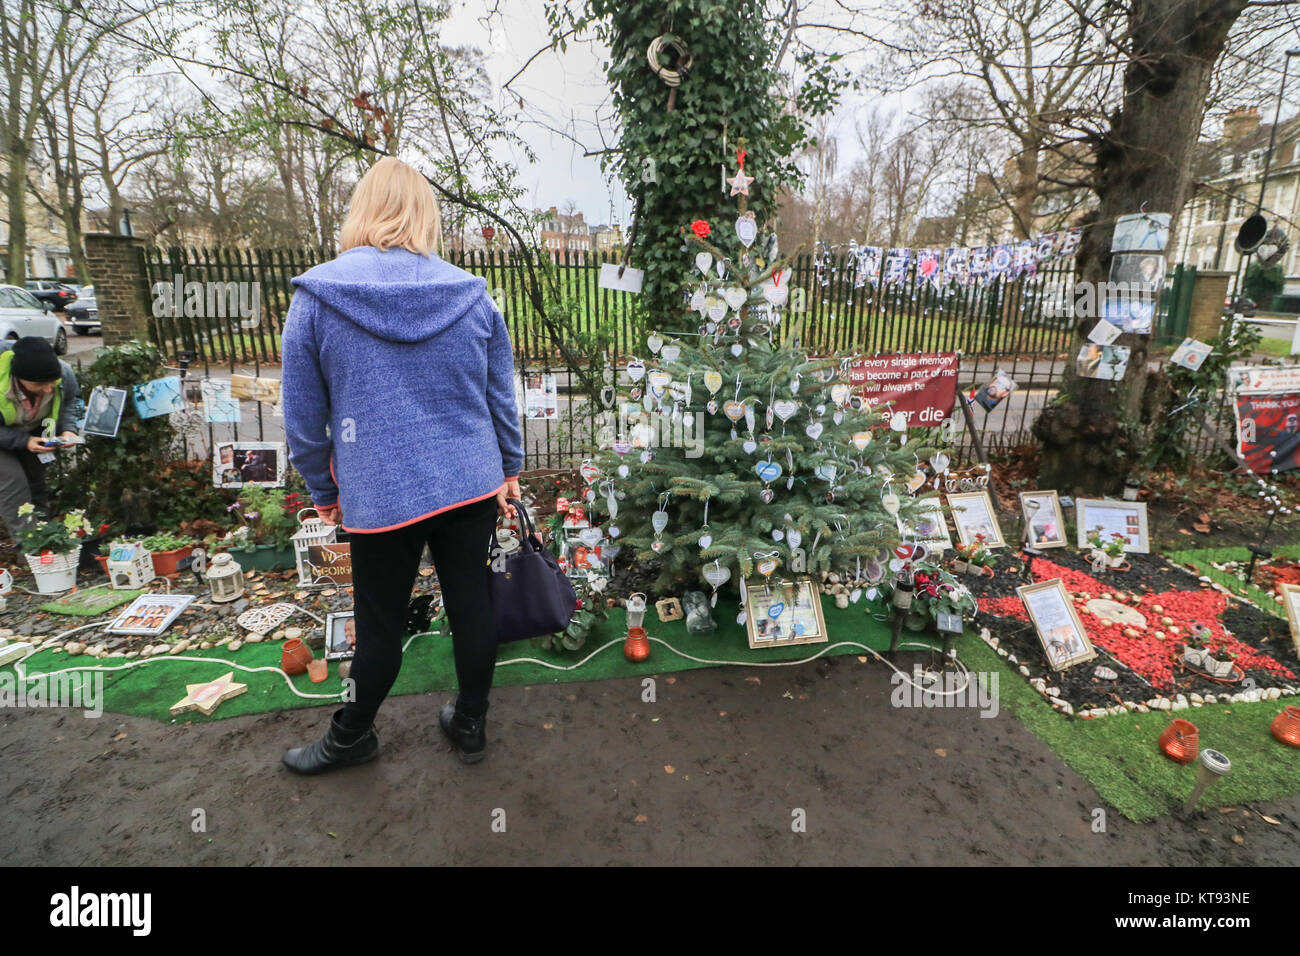 London, UK. 23rd Dec, 2017. The first anniversary  approaches of the death of British and International pop legend  George Michael  who died in Goring on Thames on 25 December 2016. Many devoted fans continue to visit and leave posthumous  tributes including  handmade items, flowers, posters and photographs at the George Michael memorial garden  set up outside the singer's former home in North London Credit: amer ghazzal/Alamy Live News Stock Photo